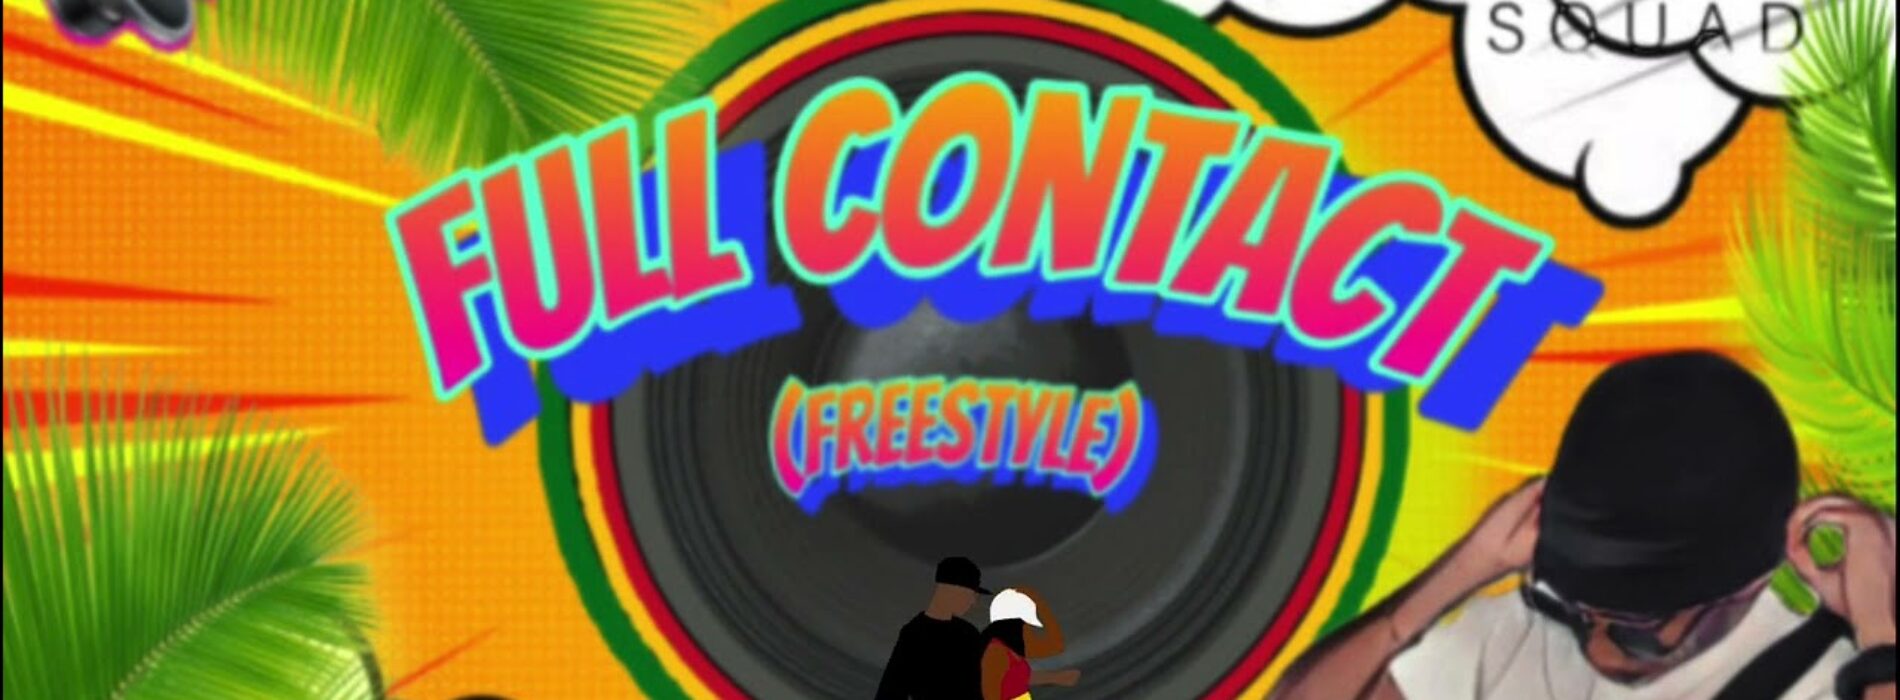 K-RIM – Full contact 💃🏽 – (Freestyle officiel) – Avril 2023